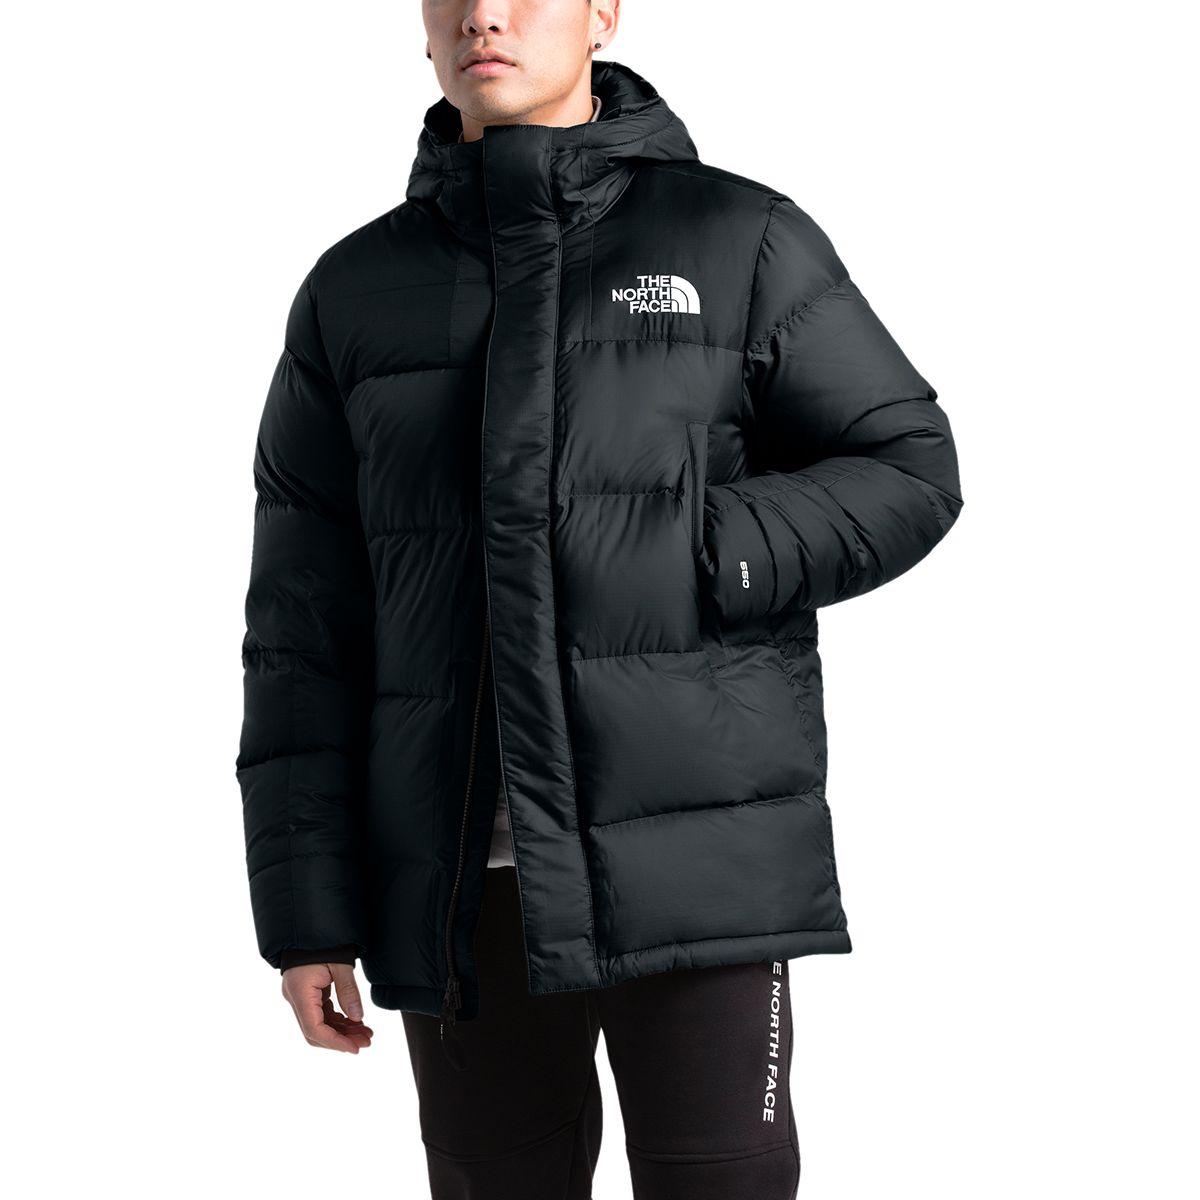 The North Face Synthetic Deptford Down Jacket in Black for Men - Lyst